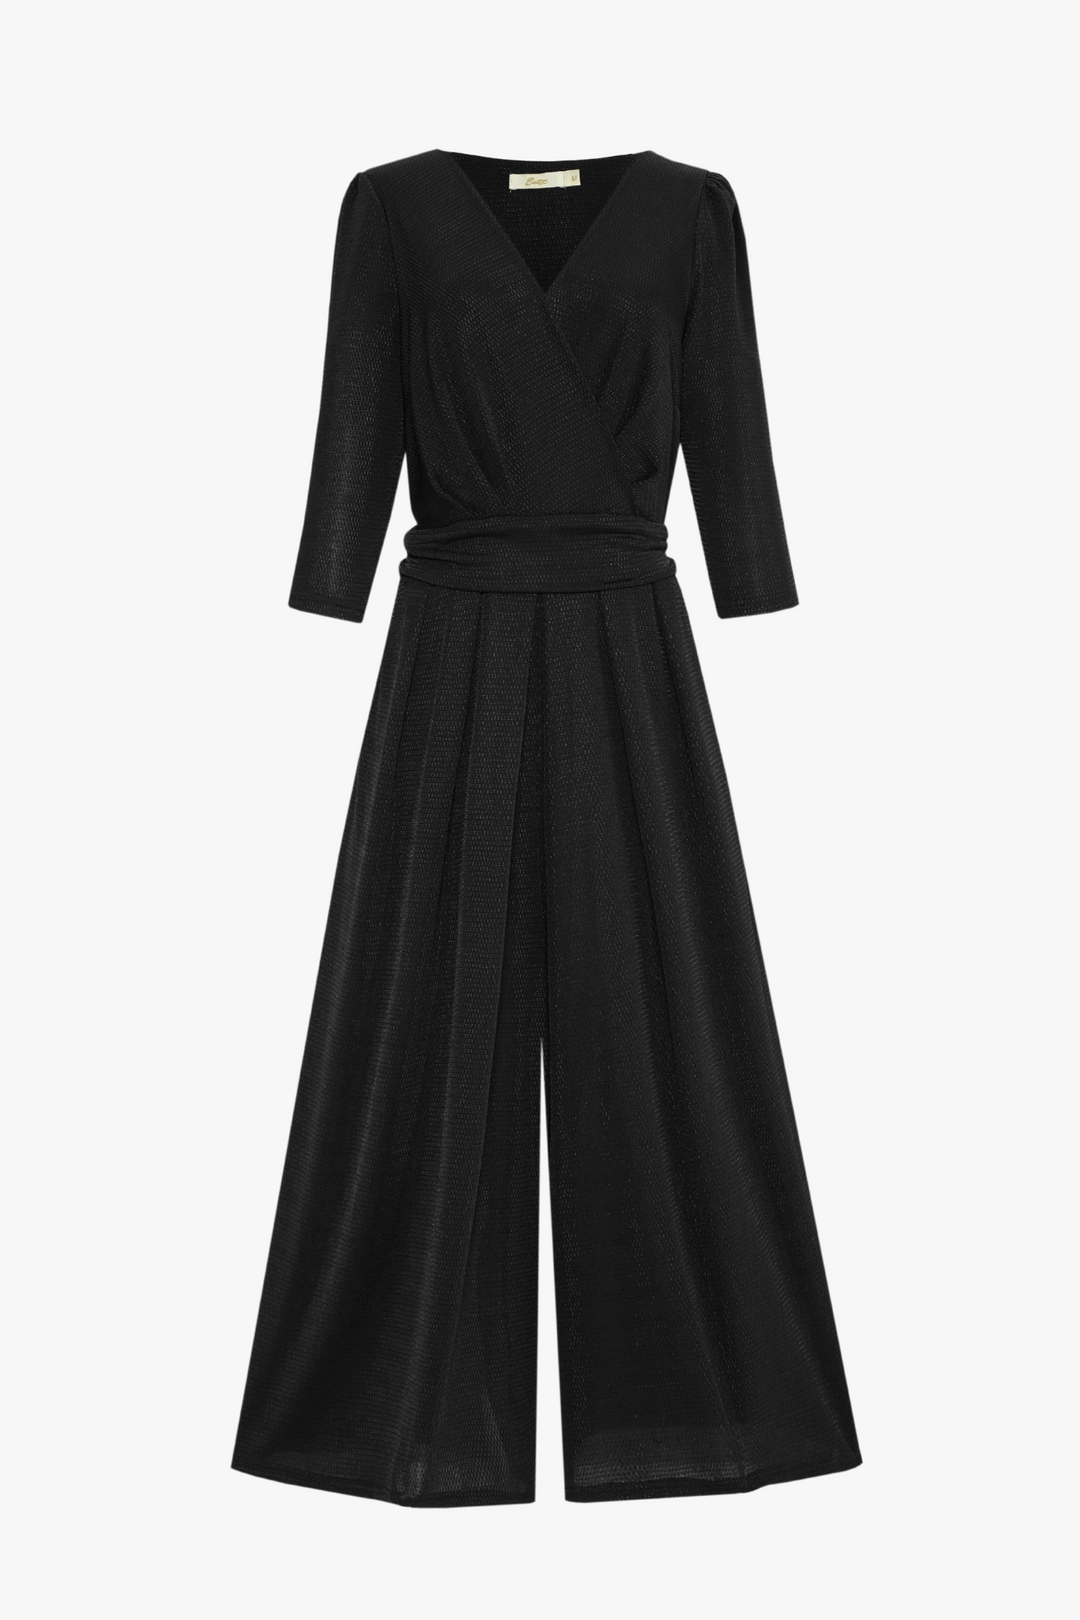 wide leg black glitter jumpsuit with a v neck, waist tie and 3/4 sleeves